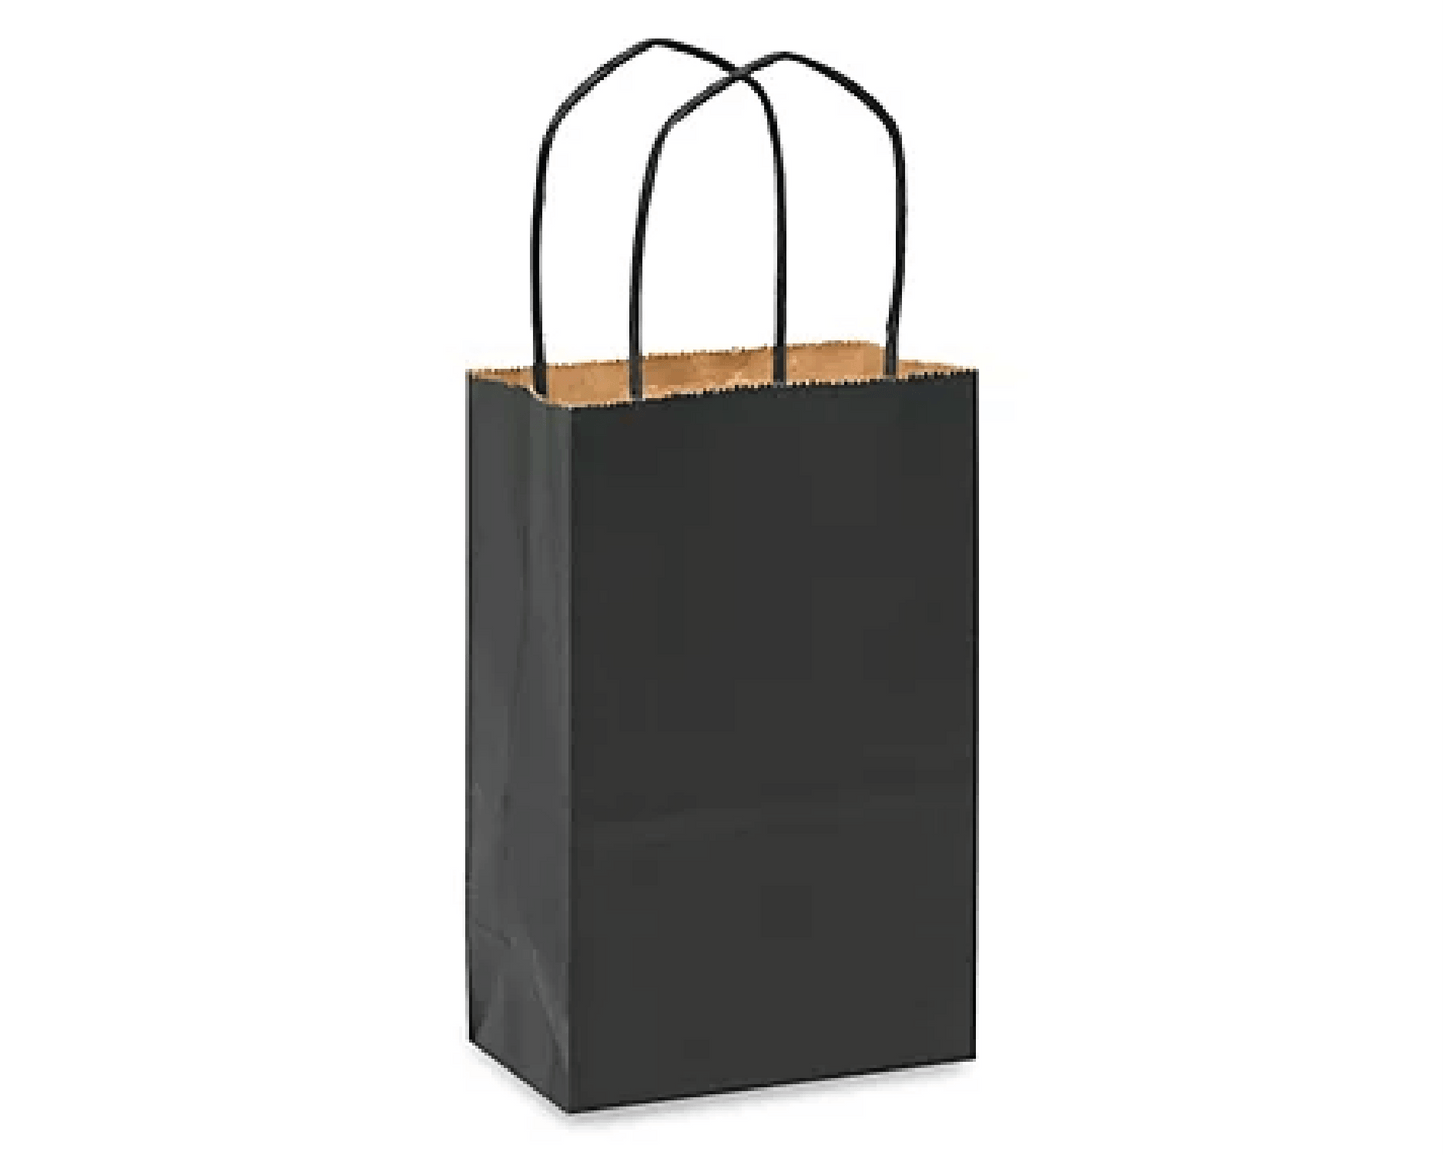 Gift Bags with Handles, Black Favor Bags . Rose Size Shopping Bags 5-1/4" x 3-1/2" x 8-1/4" - Scrap Bits